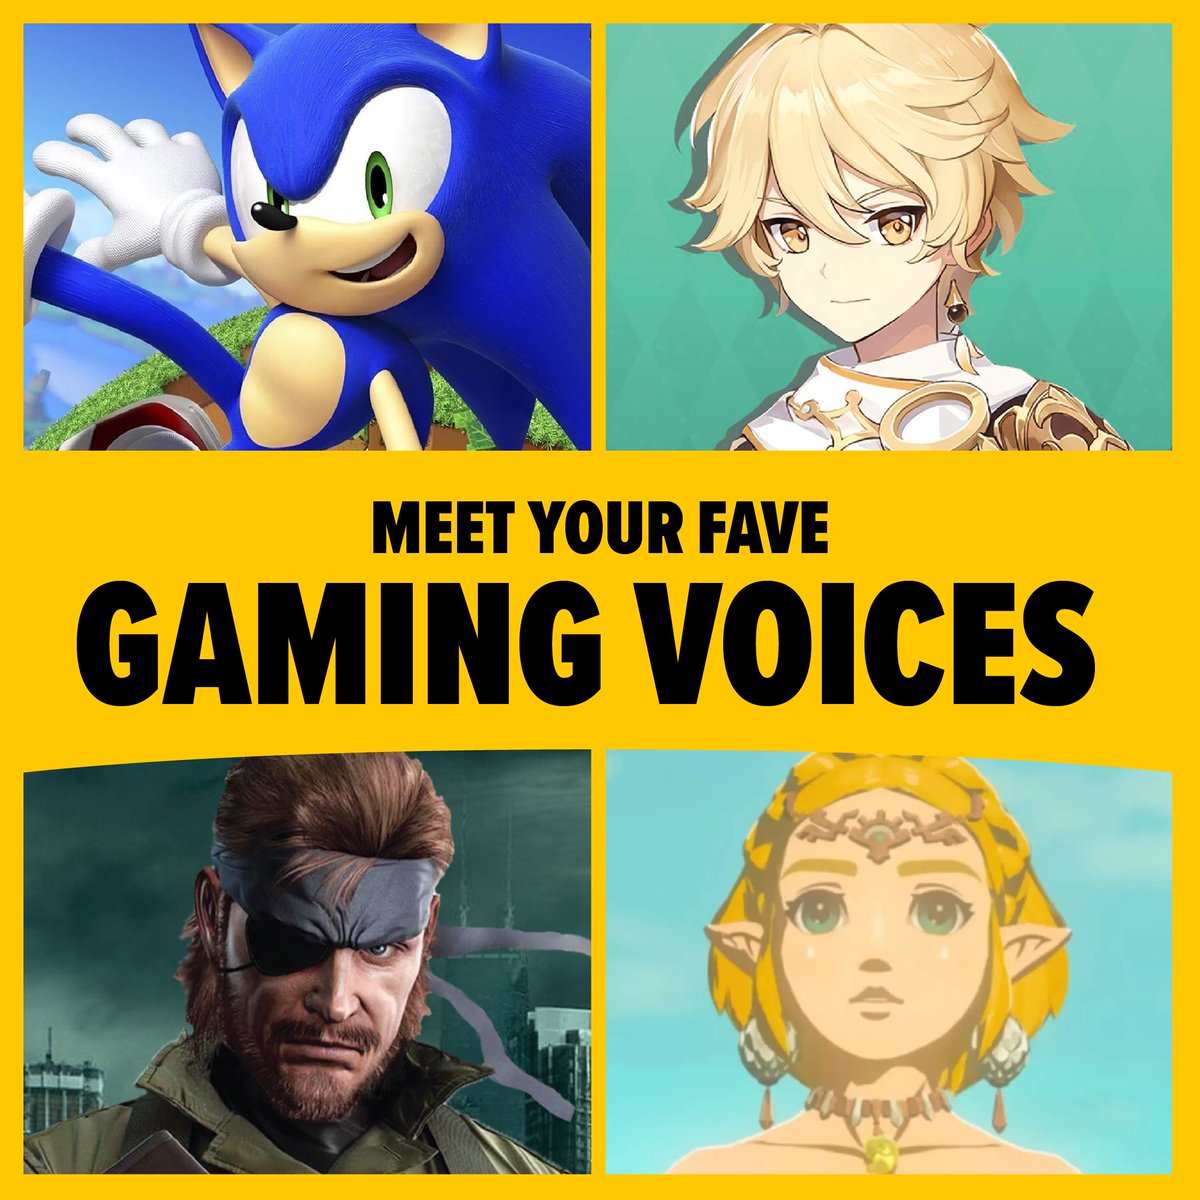 Gaming characters are loading into Boston 🎮 Meet the voices behind franchises like #StarWarsJedi, #BaldursGate and #MarvelsSpiderMan at #FANEXPO. Download your tickets now. spr.ly/6013wKtg9 @cameronmonaghan @NeilNewbon @NajJeter @RogerCraigSmith @airzach @Summersett_